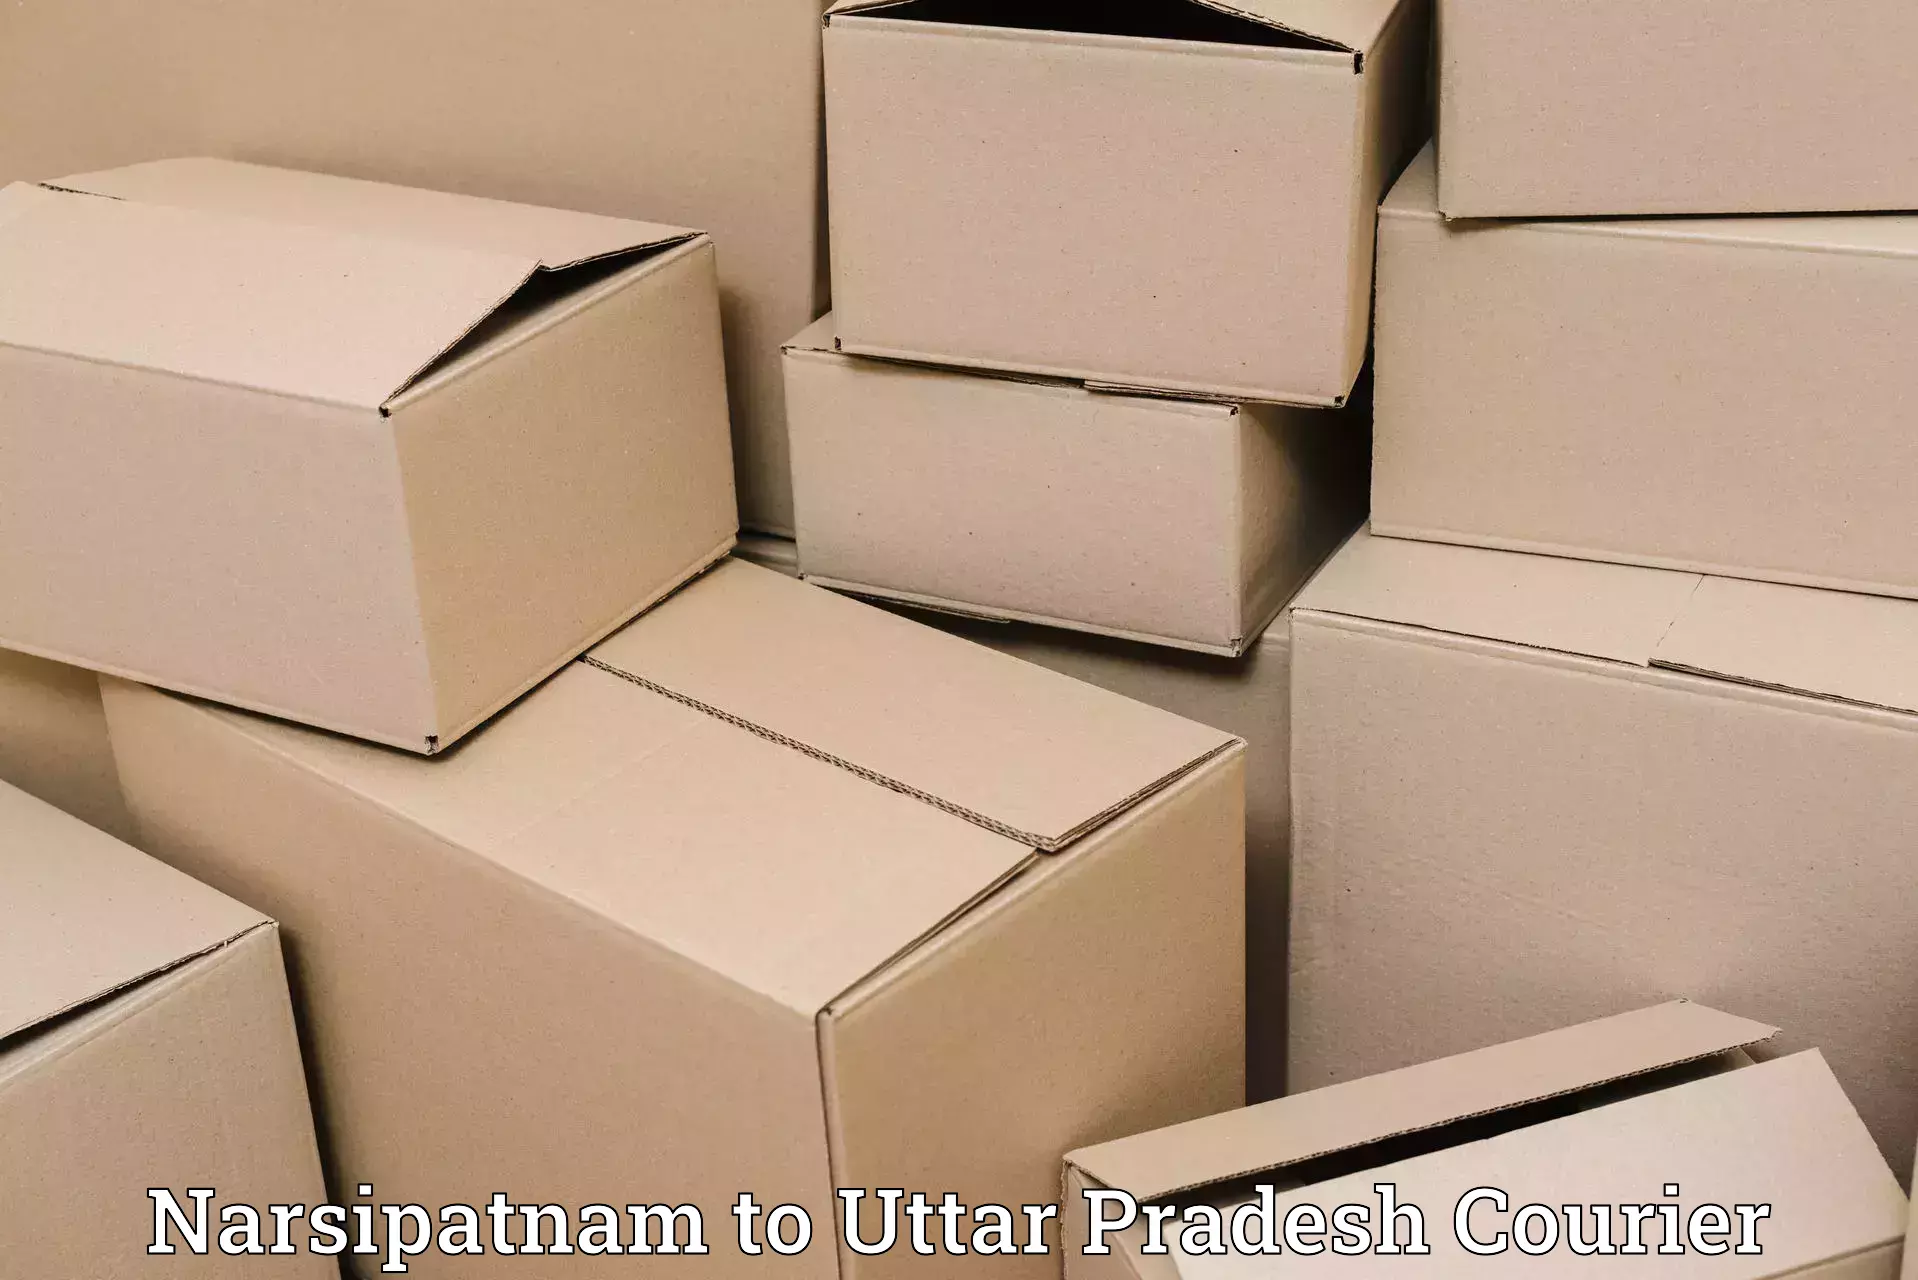 Customizable delivery plans in Narsipatnam to Agra